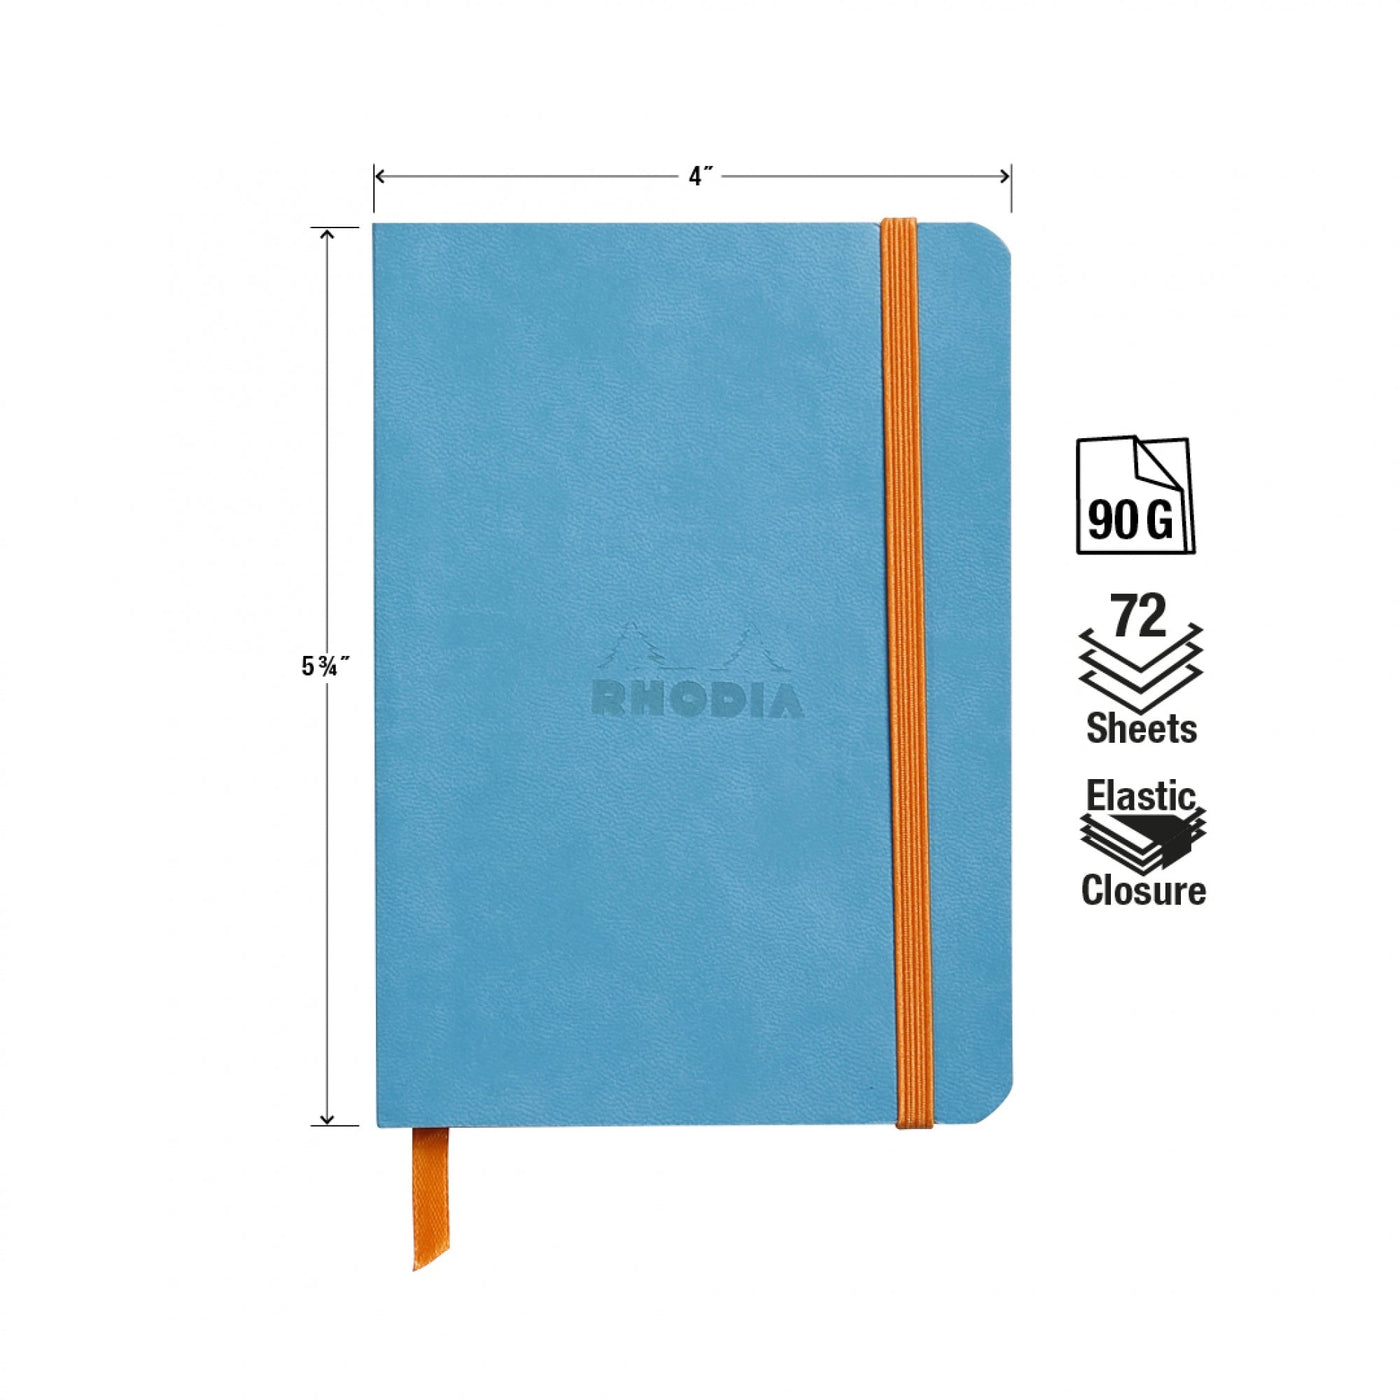 Rhodia Rhodiarama Turquoise A6 Soft Cover Dotted Notebook Measurements